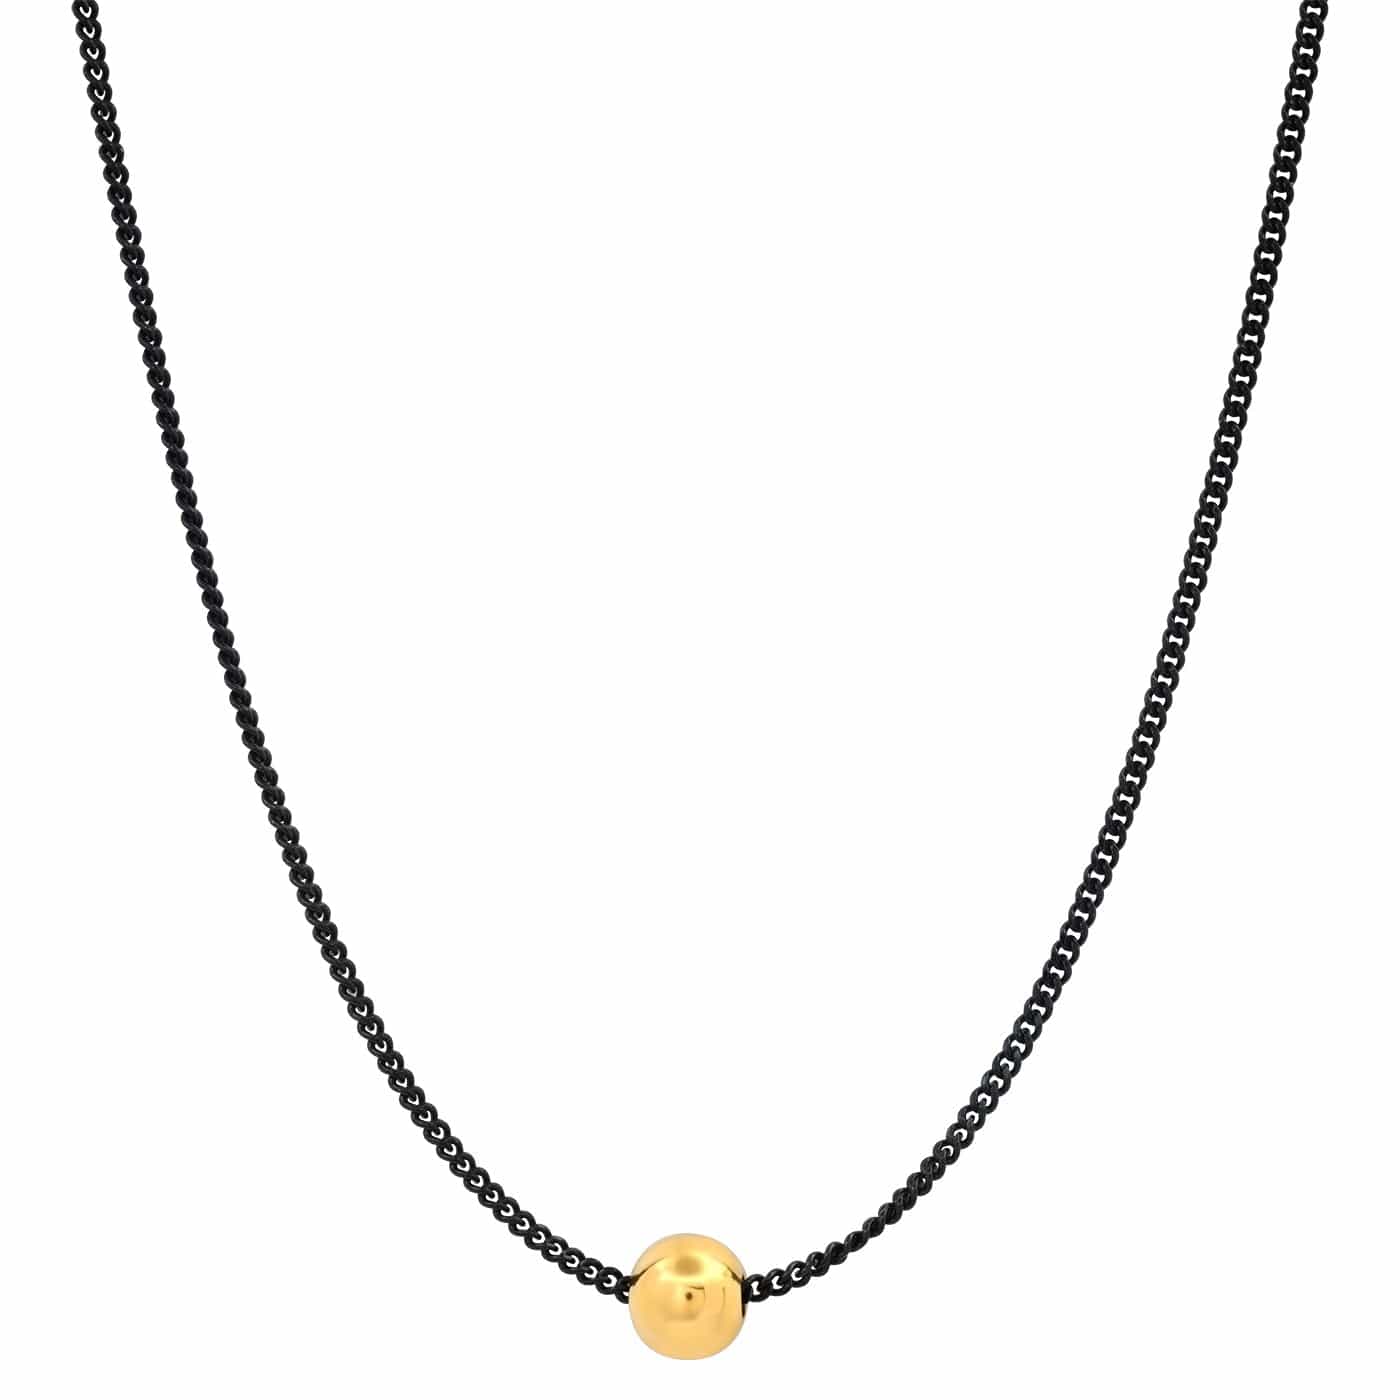 TAI JEWELRY Necklace Black Cable Chain with Gold Ball